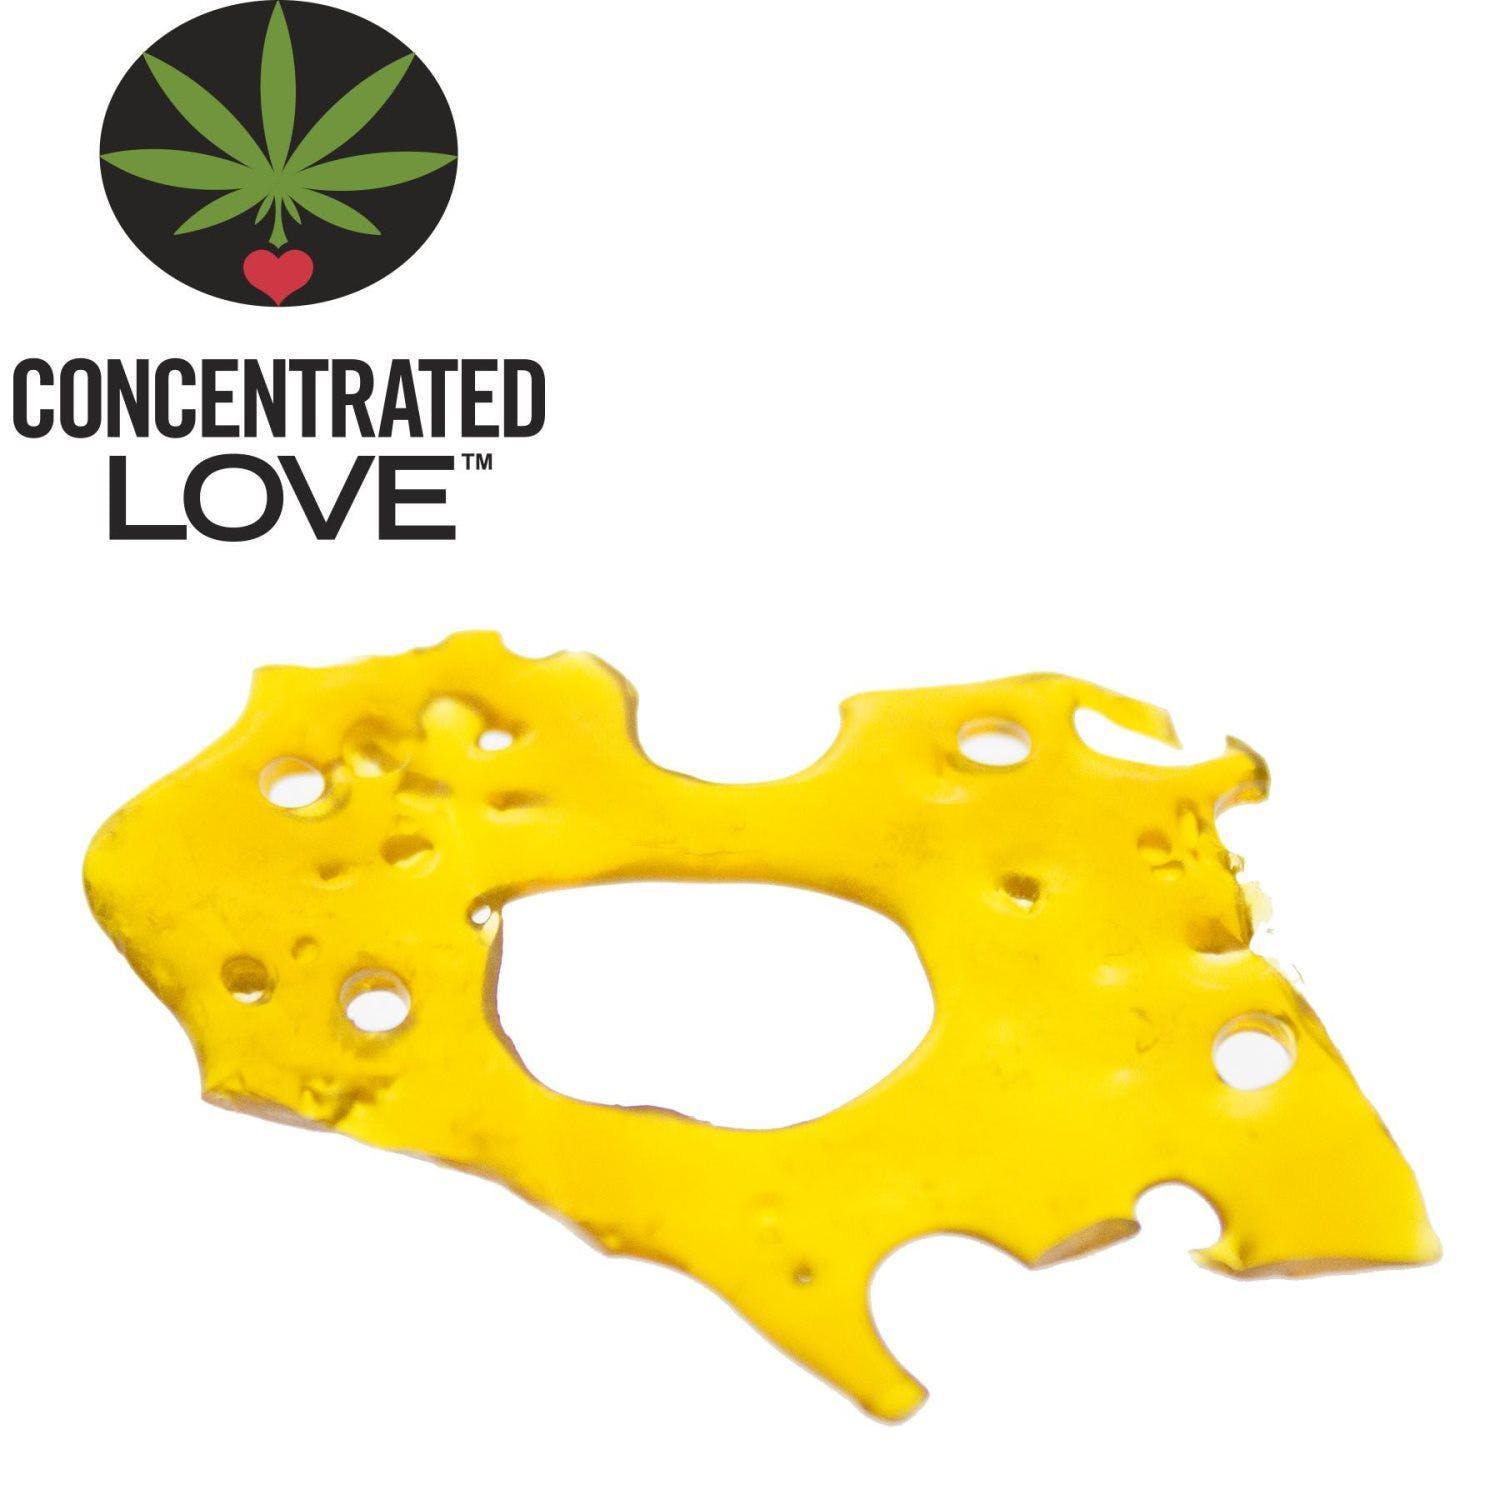 concentrate-concentrated-love-headbanger-shatter